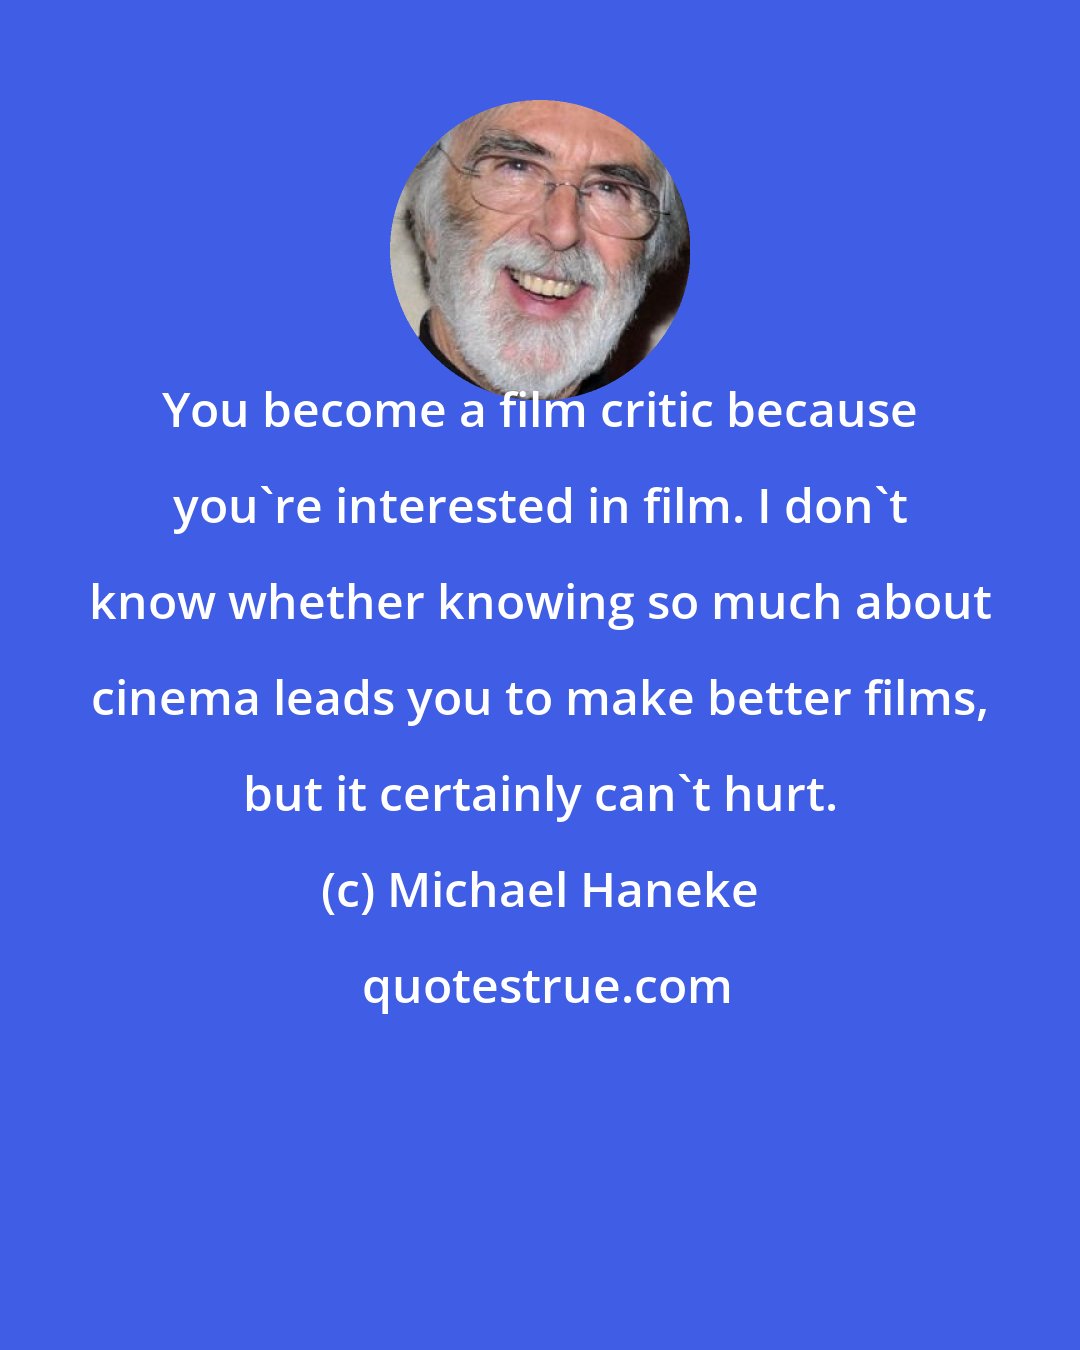 Michael Haneke: You become a film critic because you're interested in film. I don't know whether knowing so much about cinema leads you to make better films, but it certainly can't hurt.